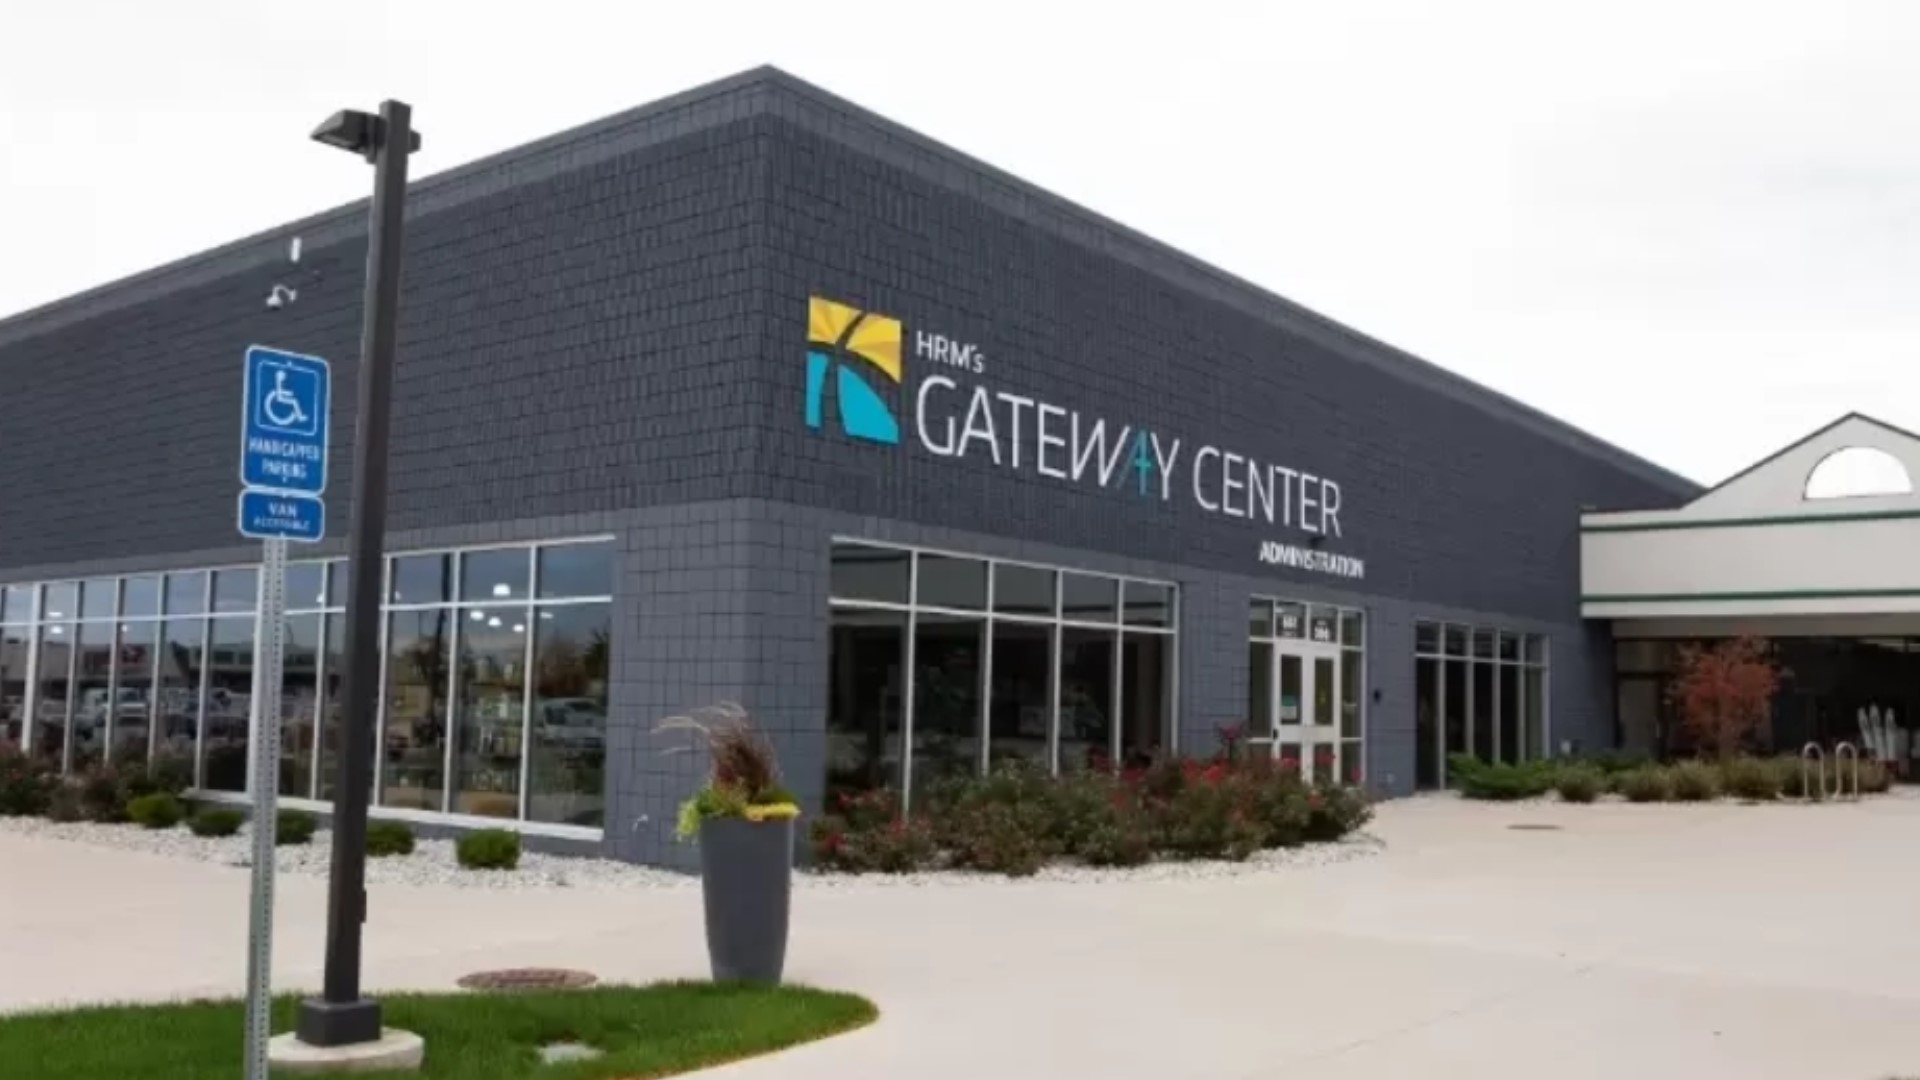 Gateway Mission, an emergency shelter in Holland, suffered a fire over the weekend that burned their pantry, the organization announced.